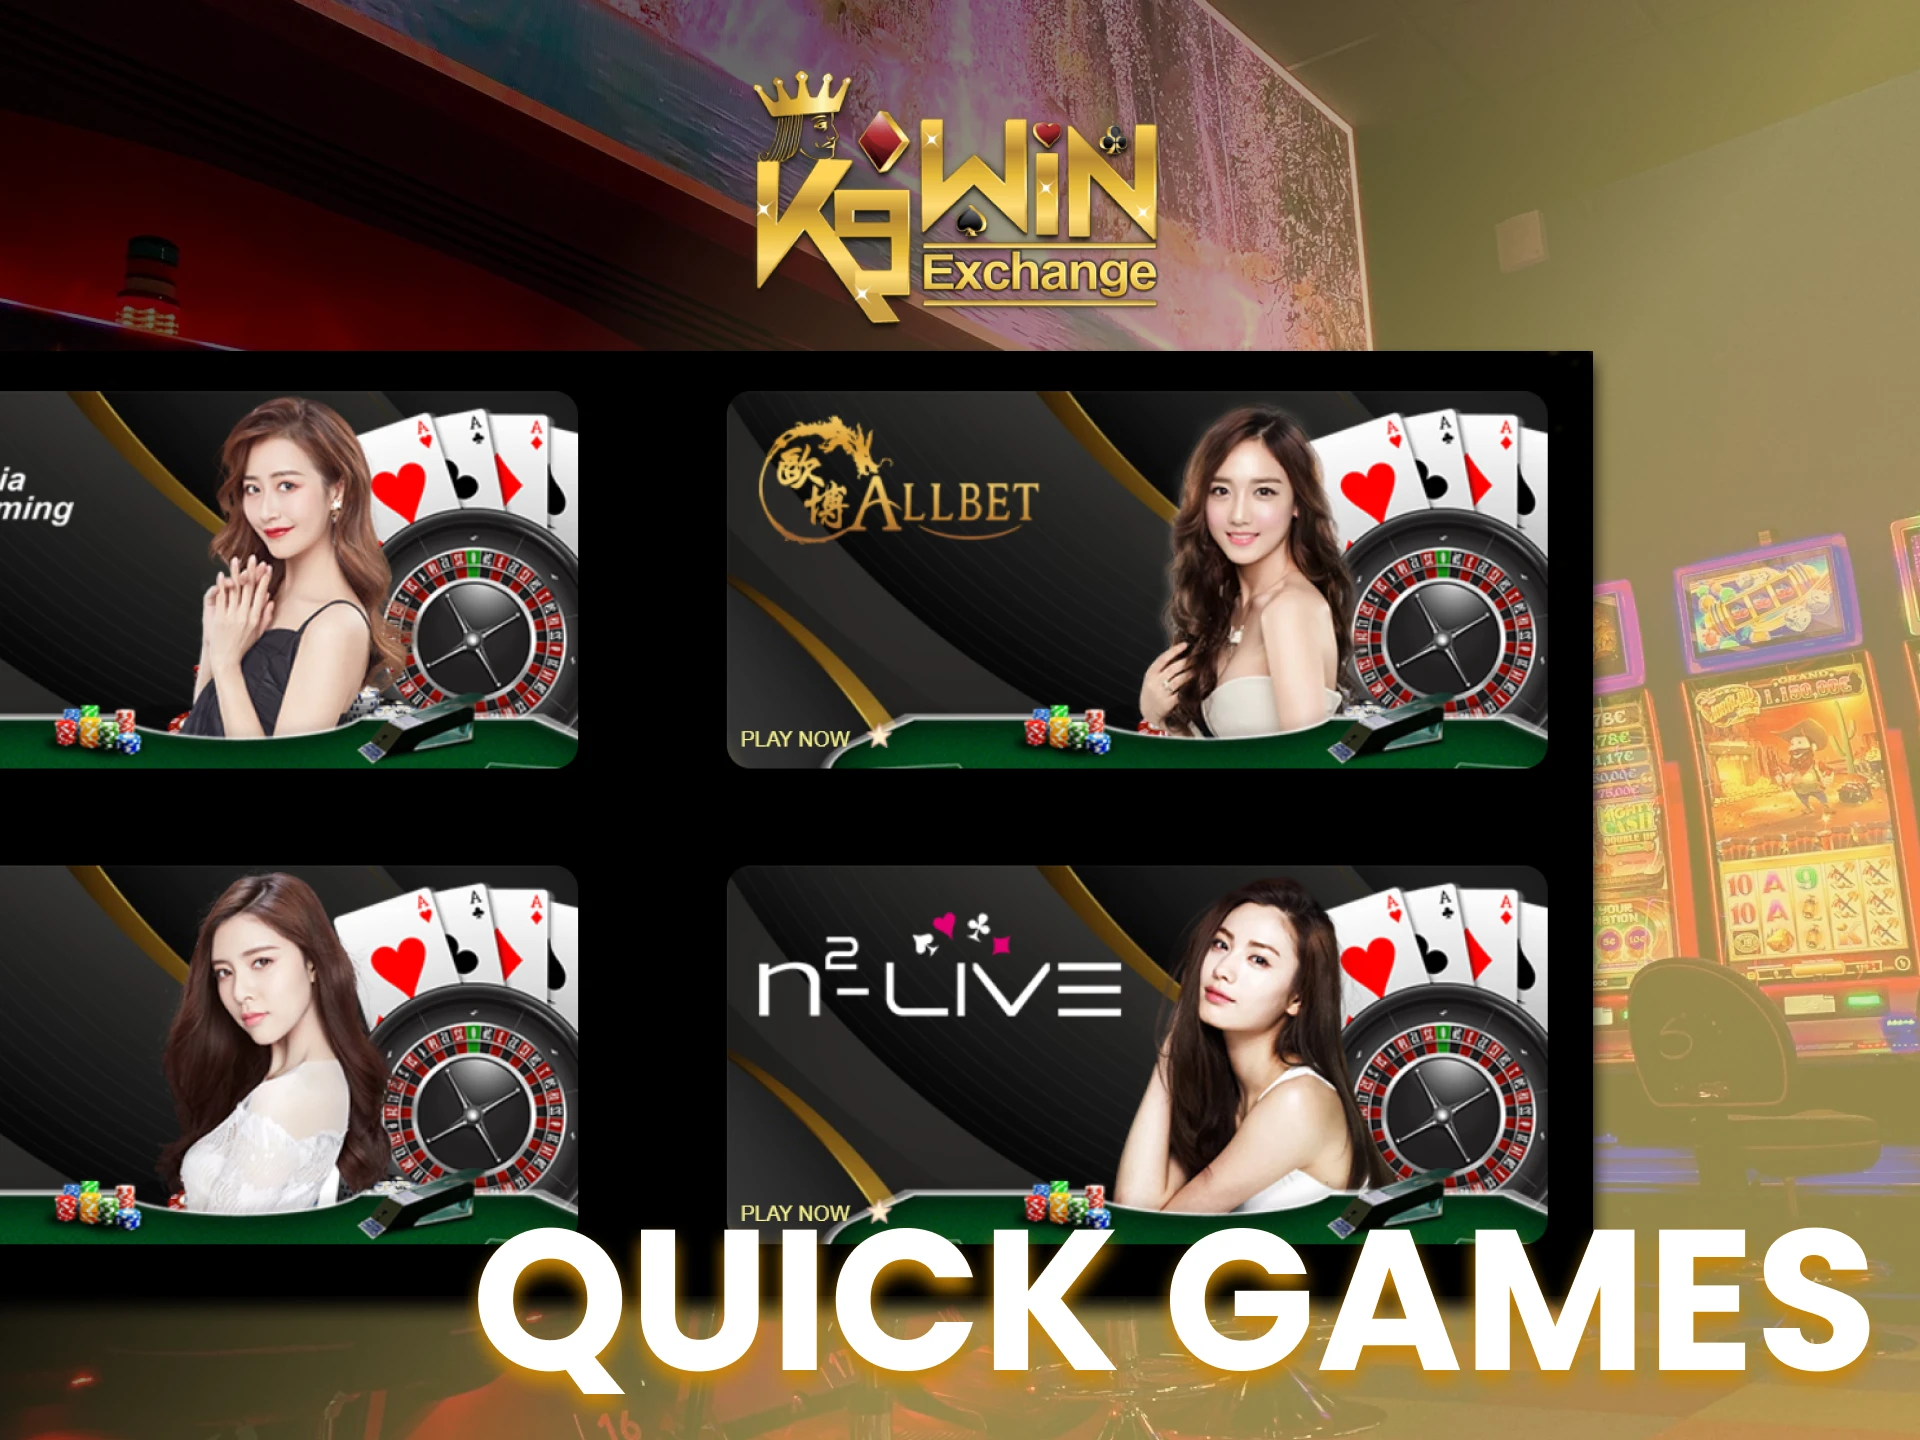 Play quick games on the special K9Win casino page.